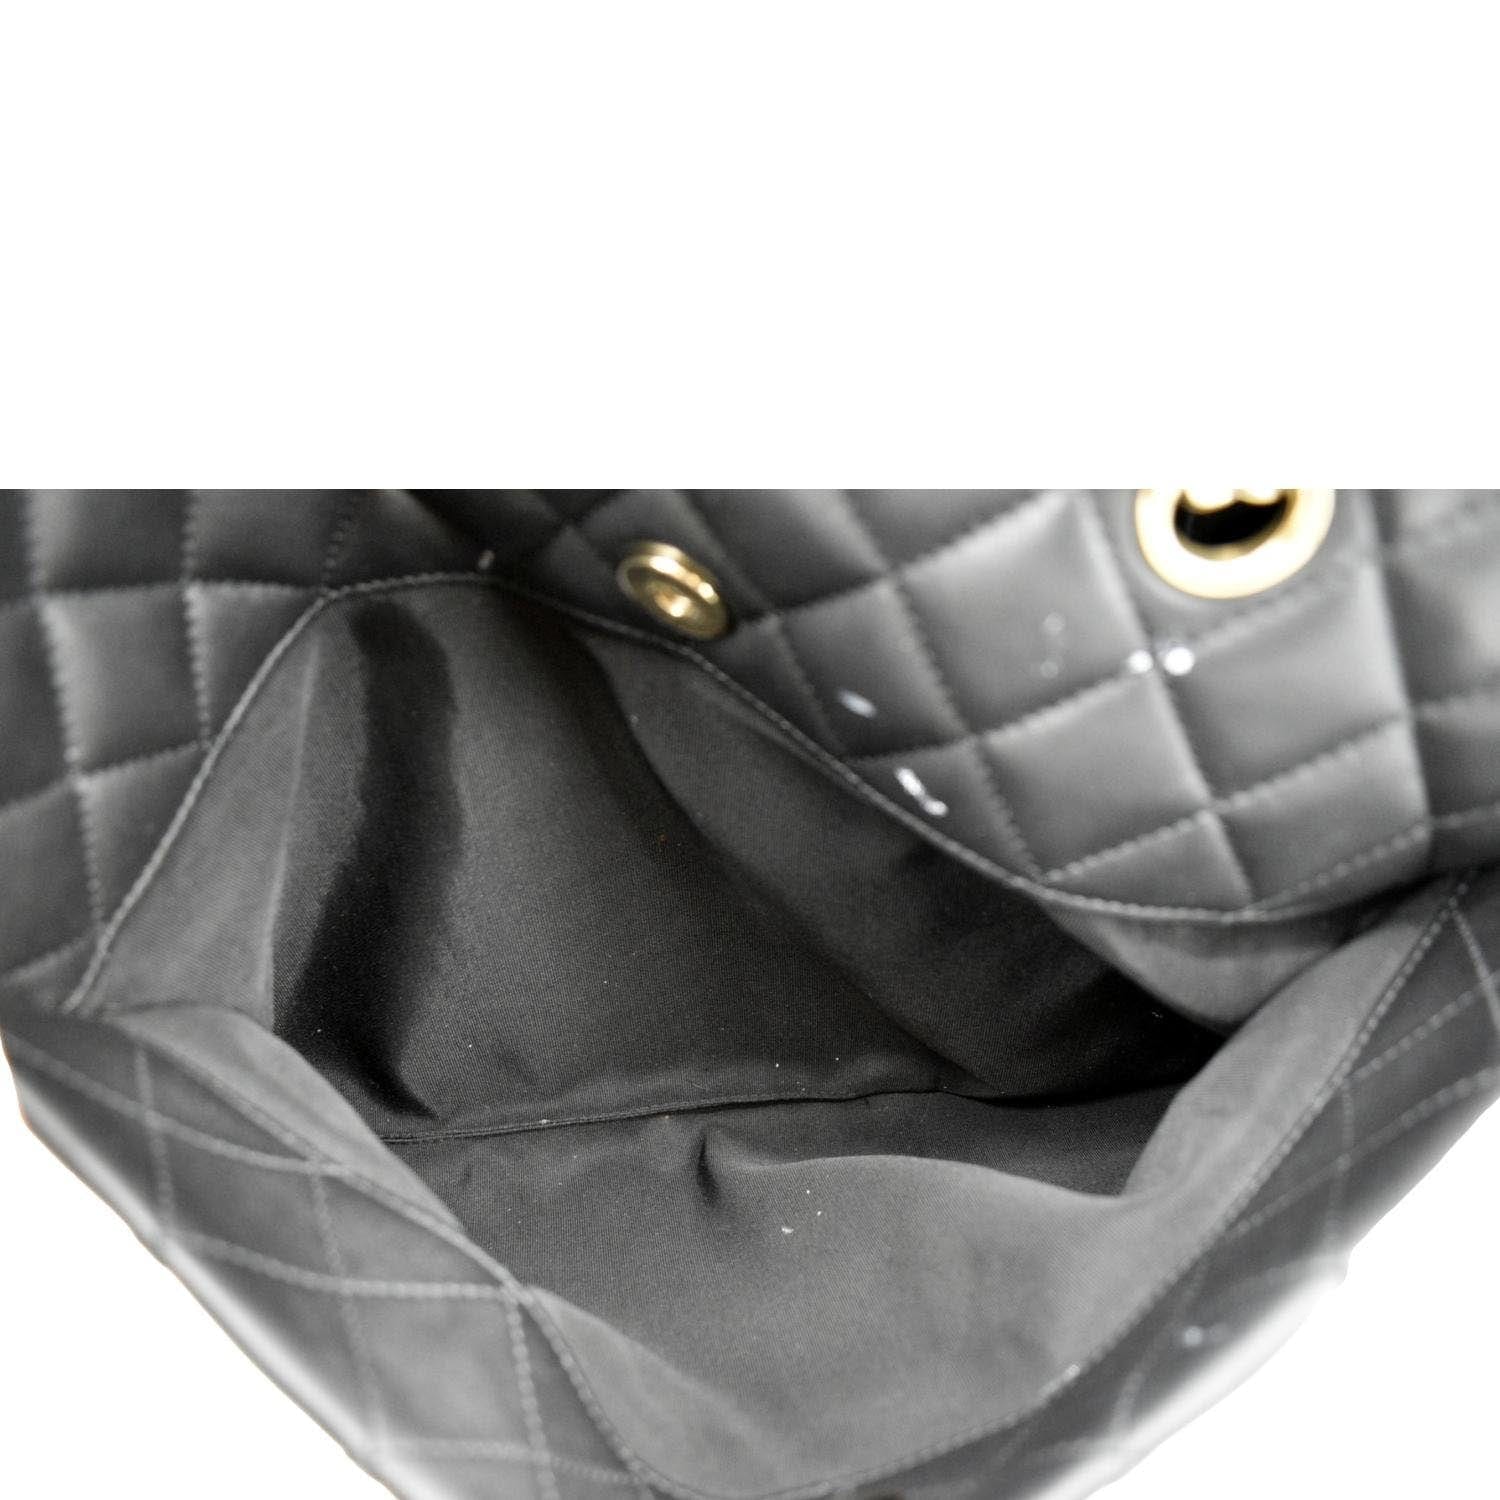 Quilted Caviar Small Classic Flap Bag Black with Silver Hardware